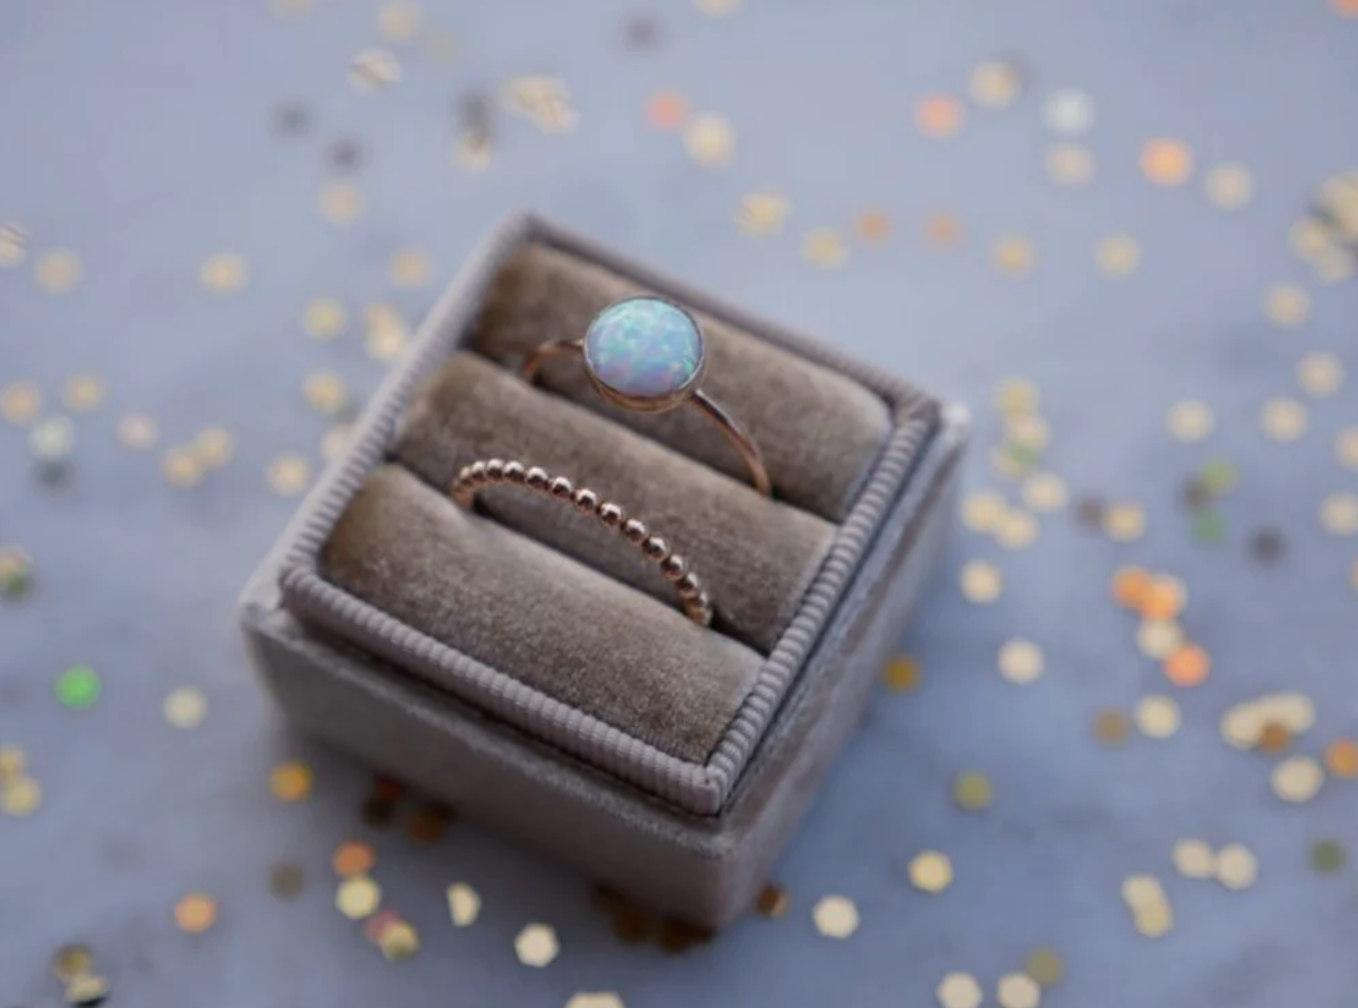 two rings, one opal one ridged, in ring box surrounded by glitter, created by Emily Warden designs